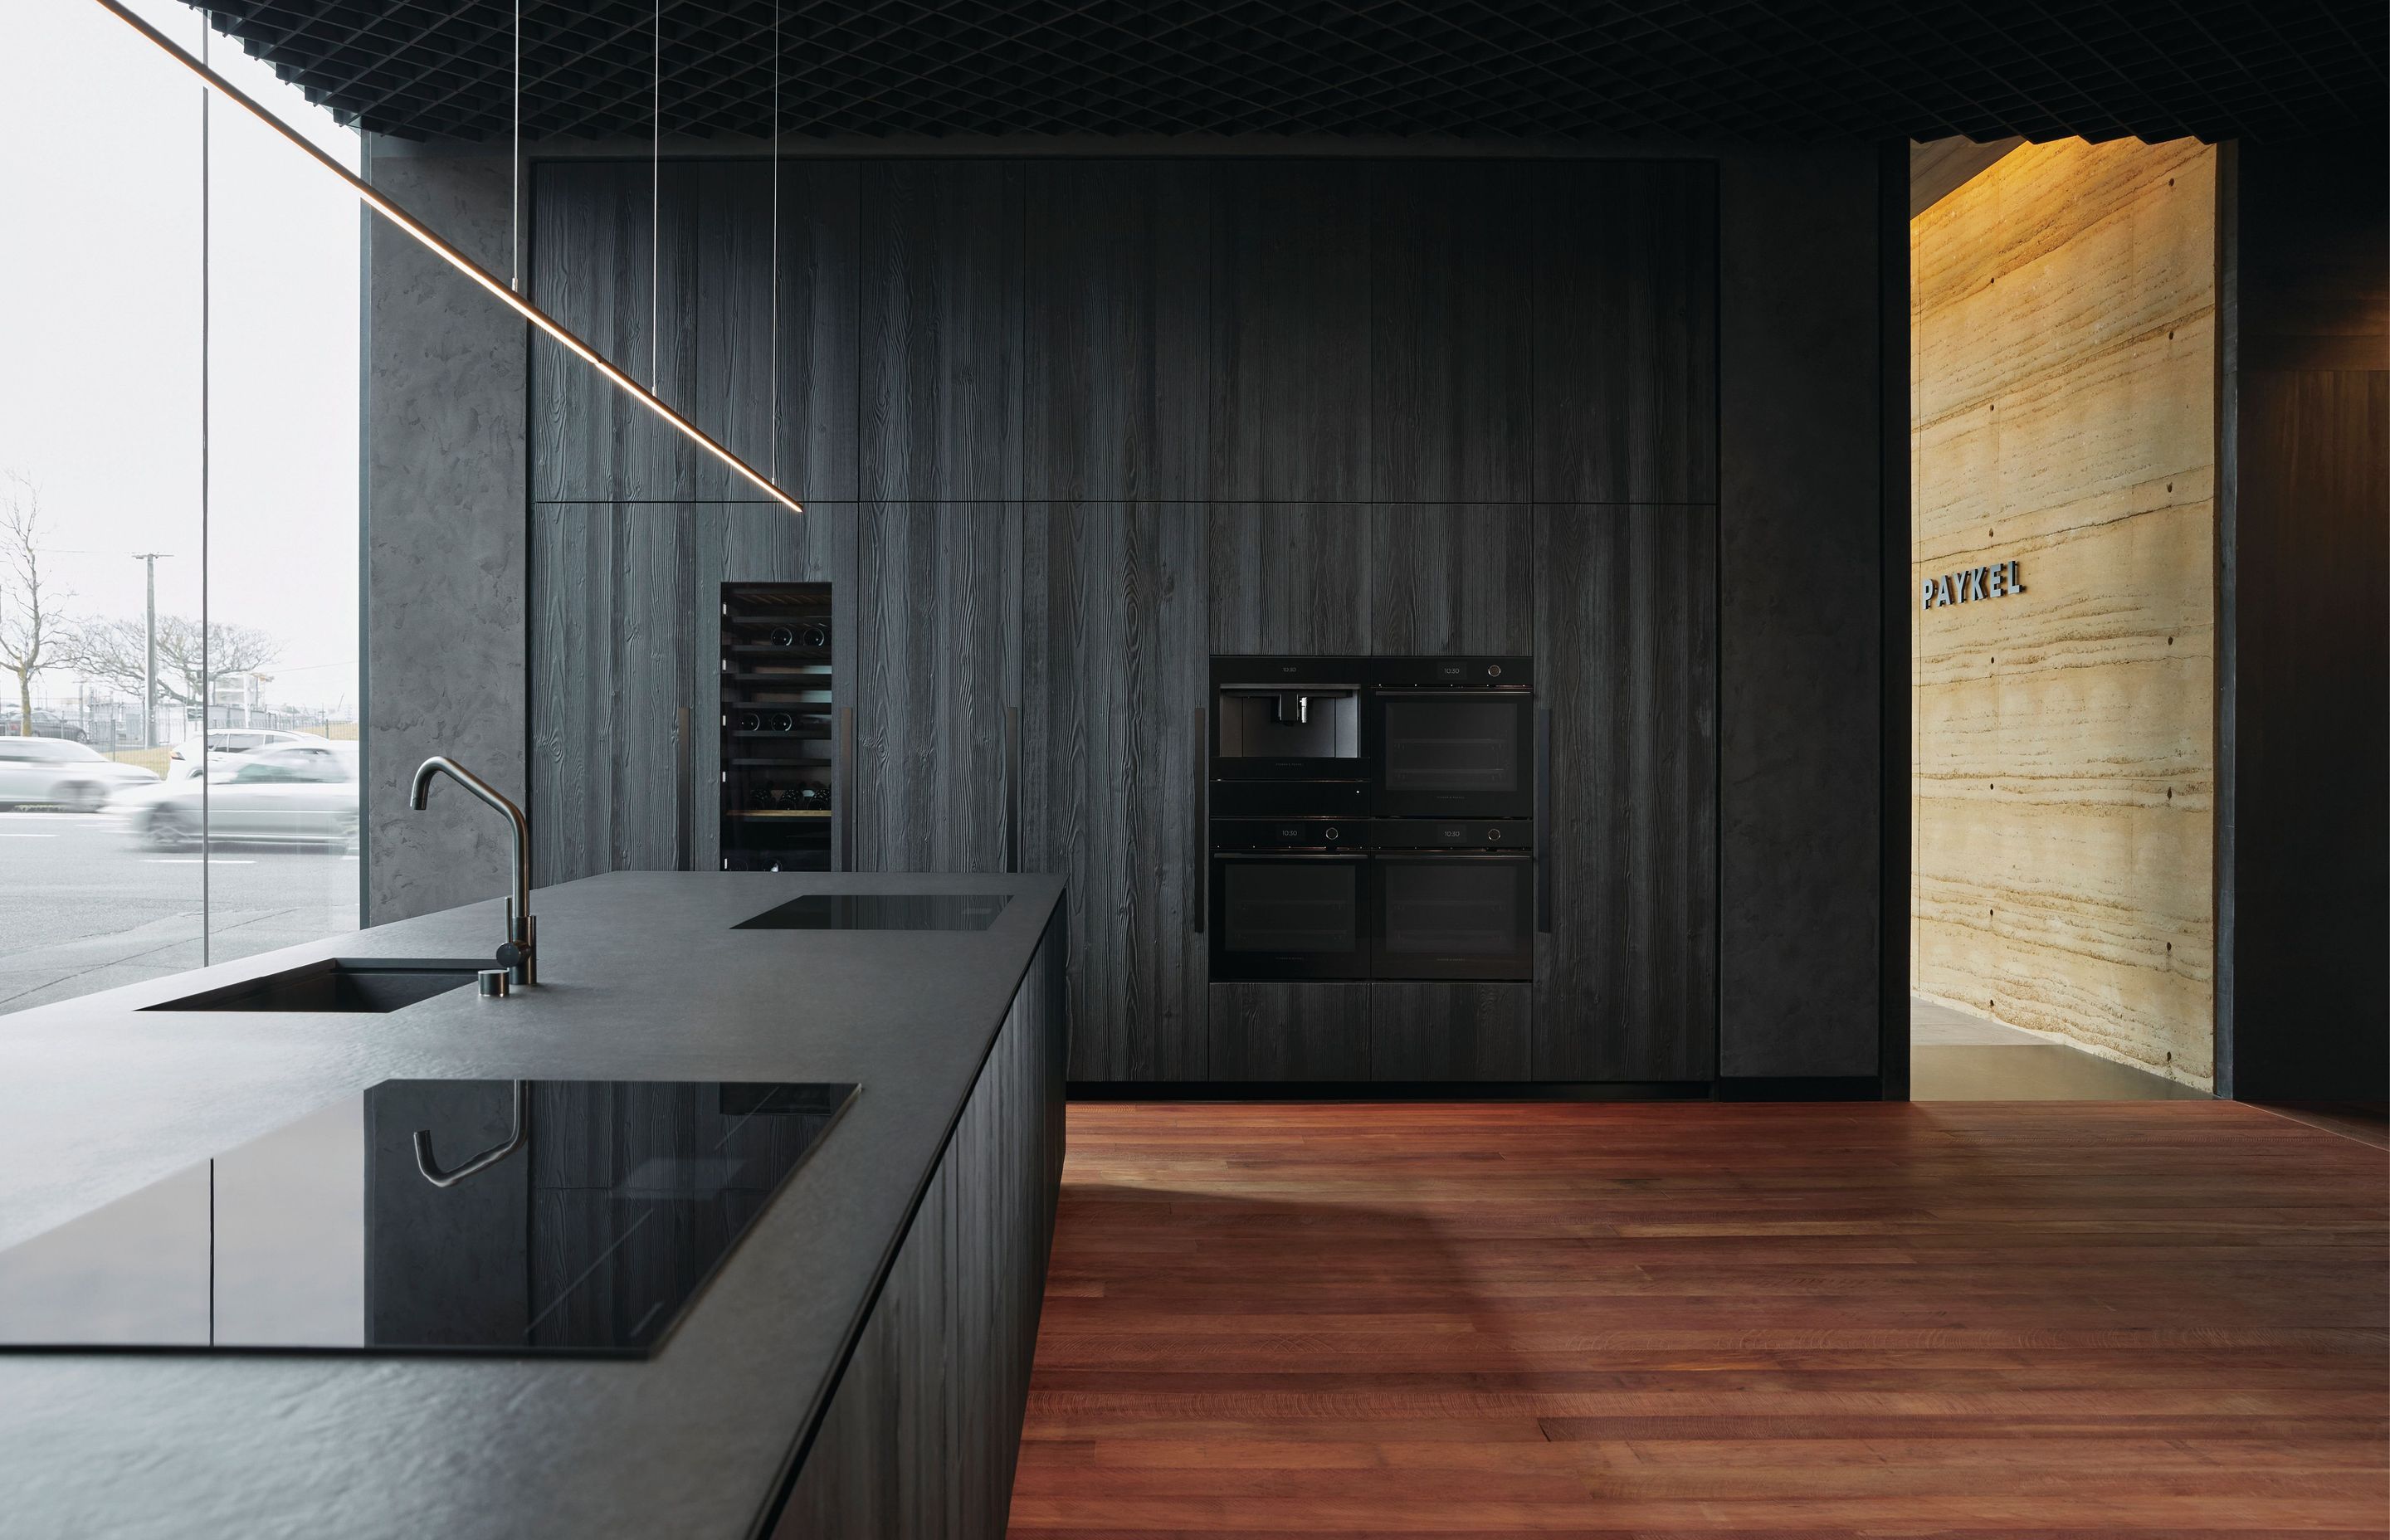 This 'minimal' kitchen features sleek, black appliances to match the paired back aesthetic.